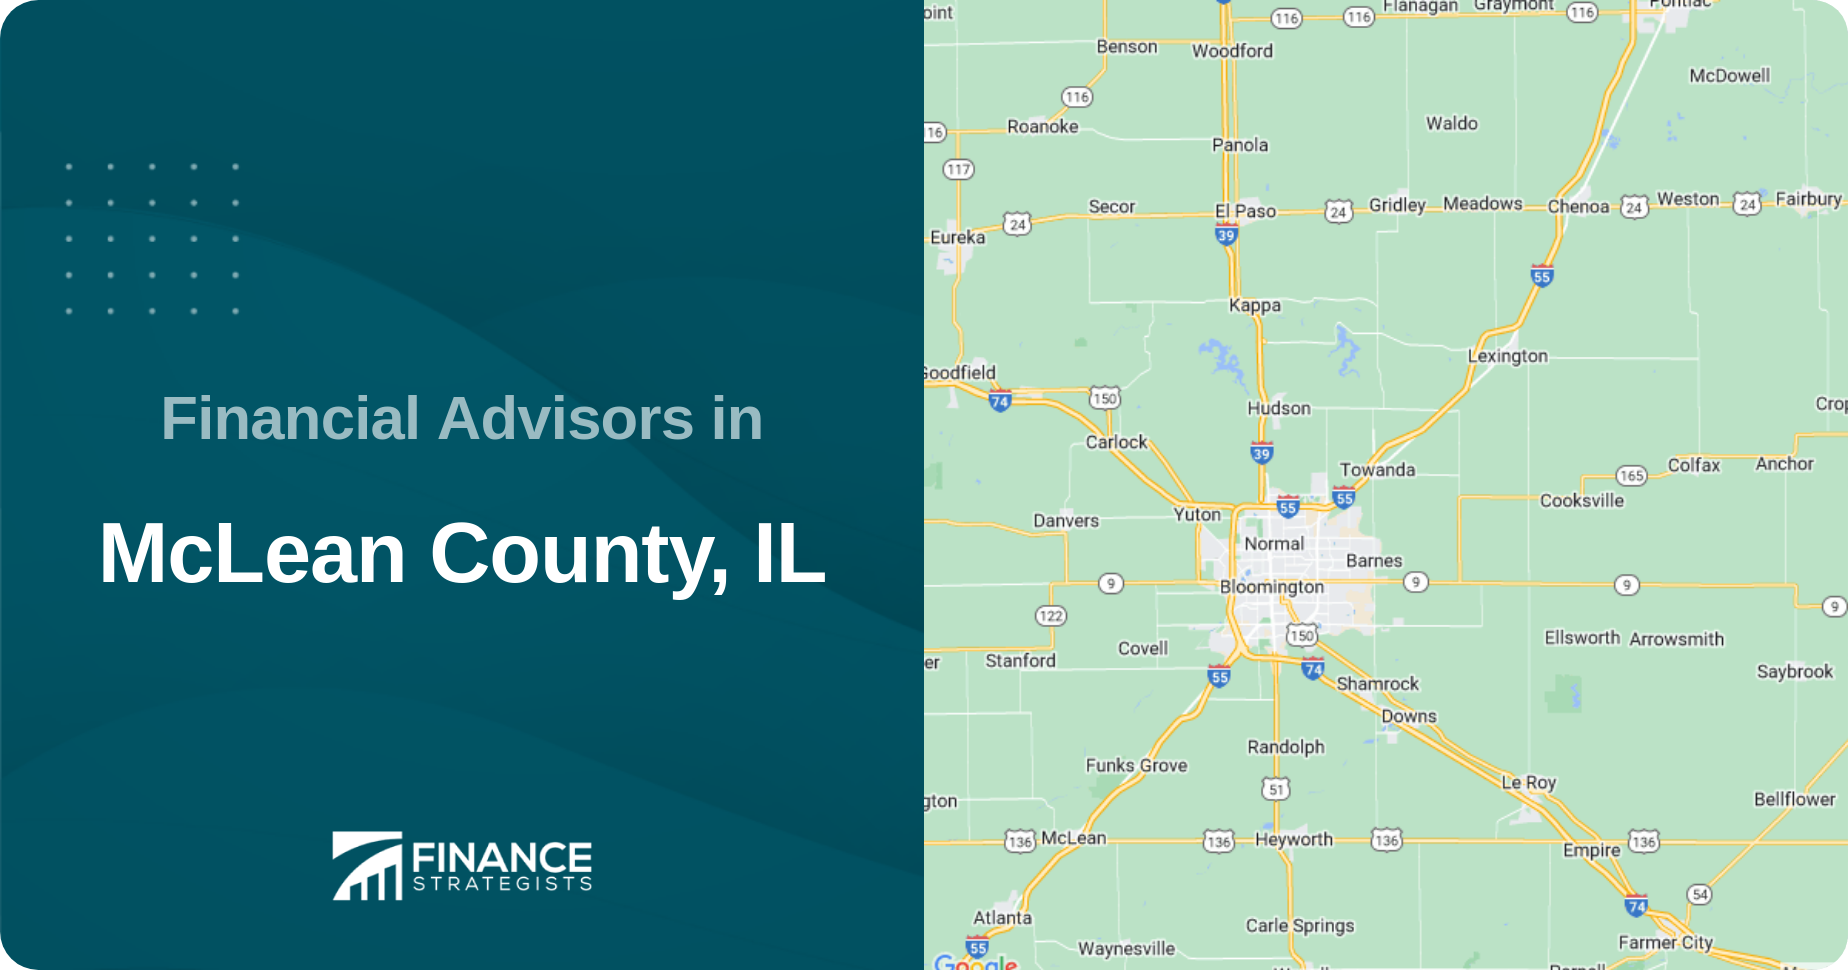 Financial Advisors in McLean County, IL